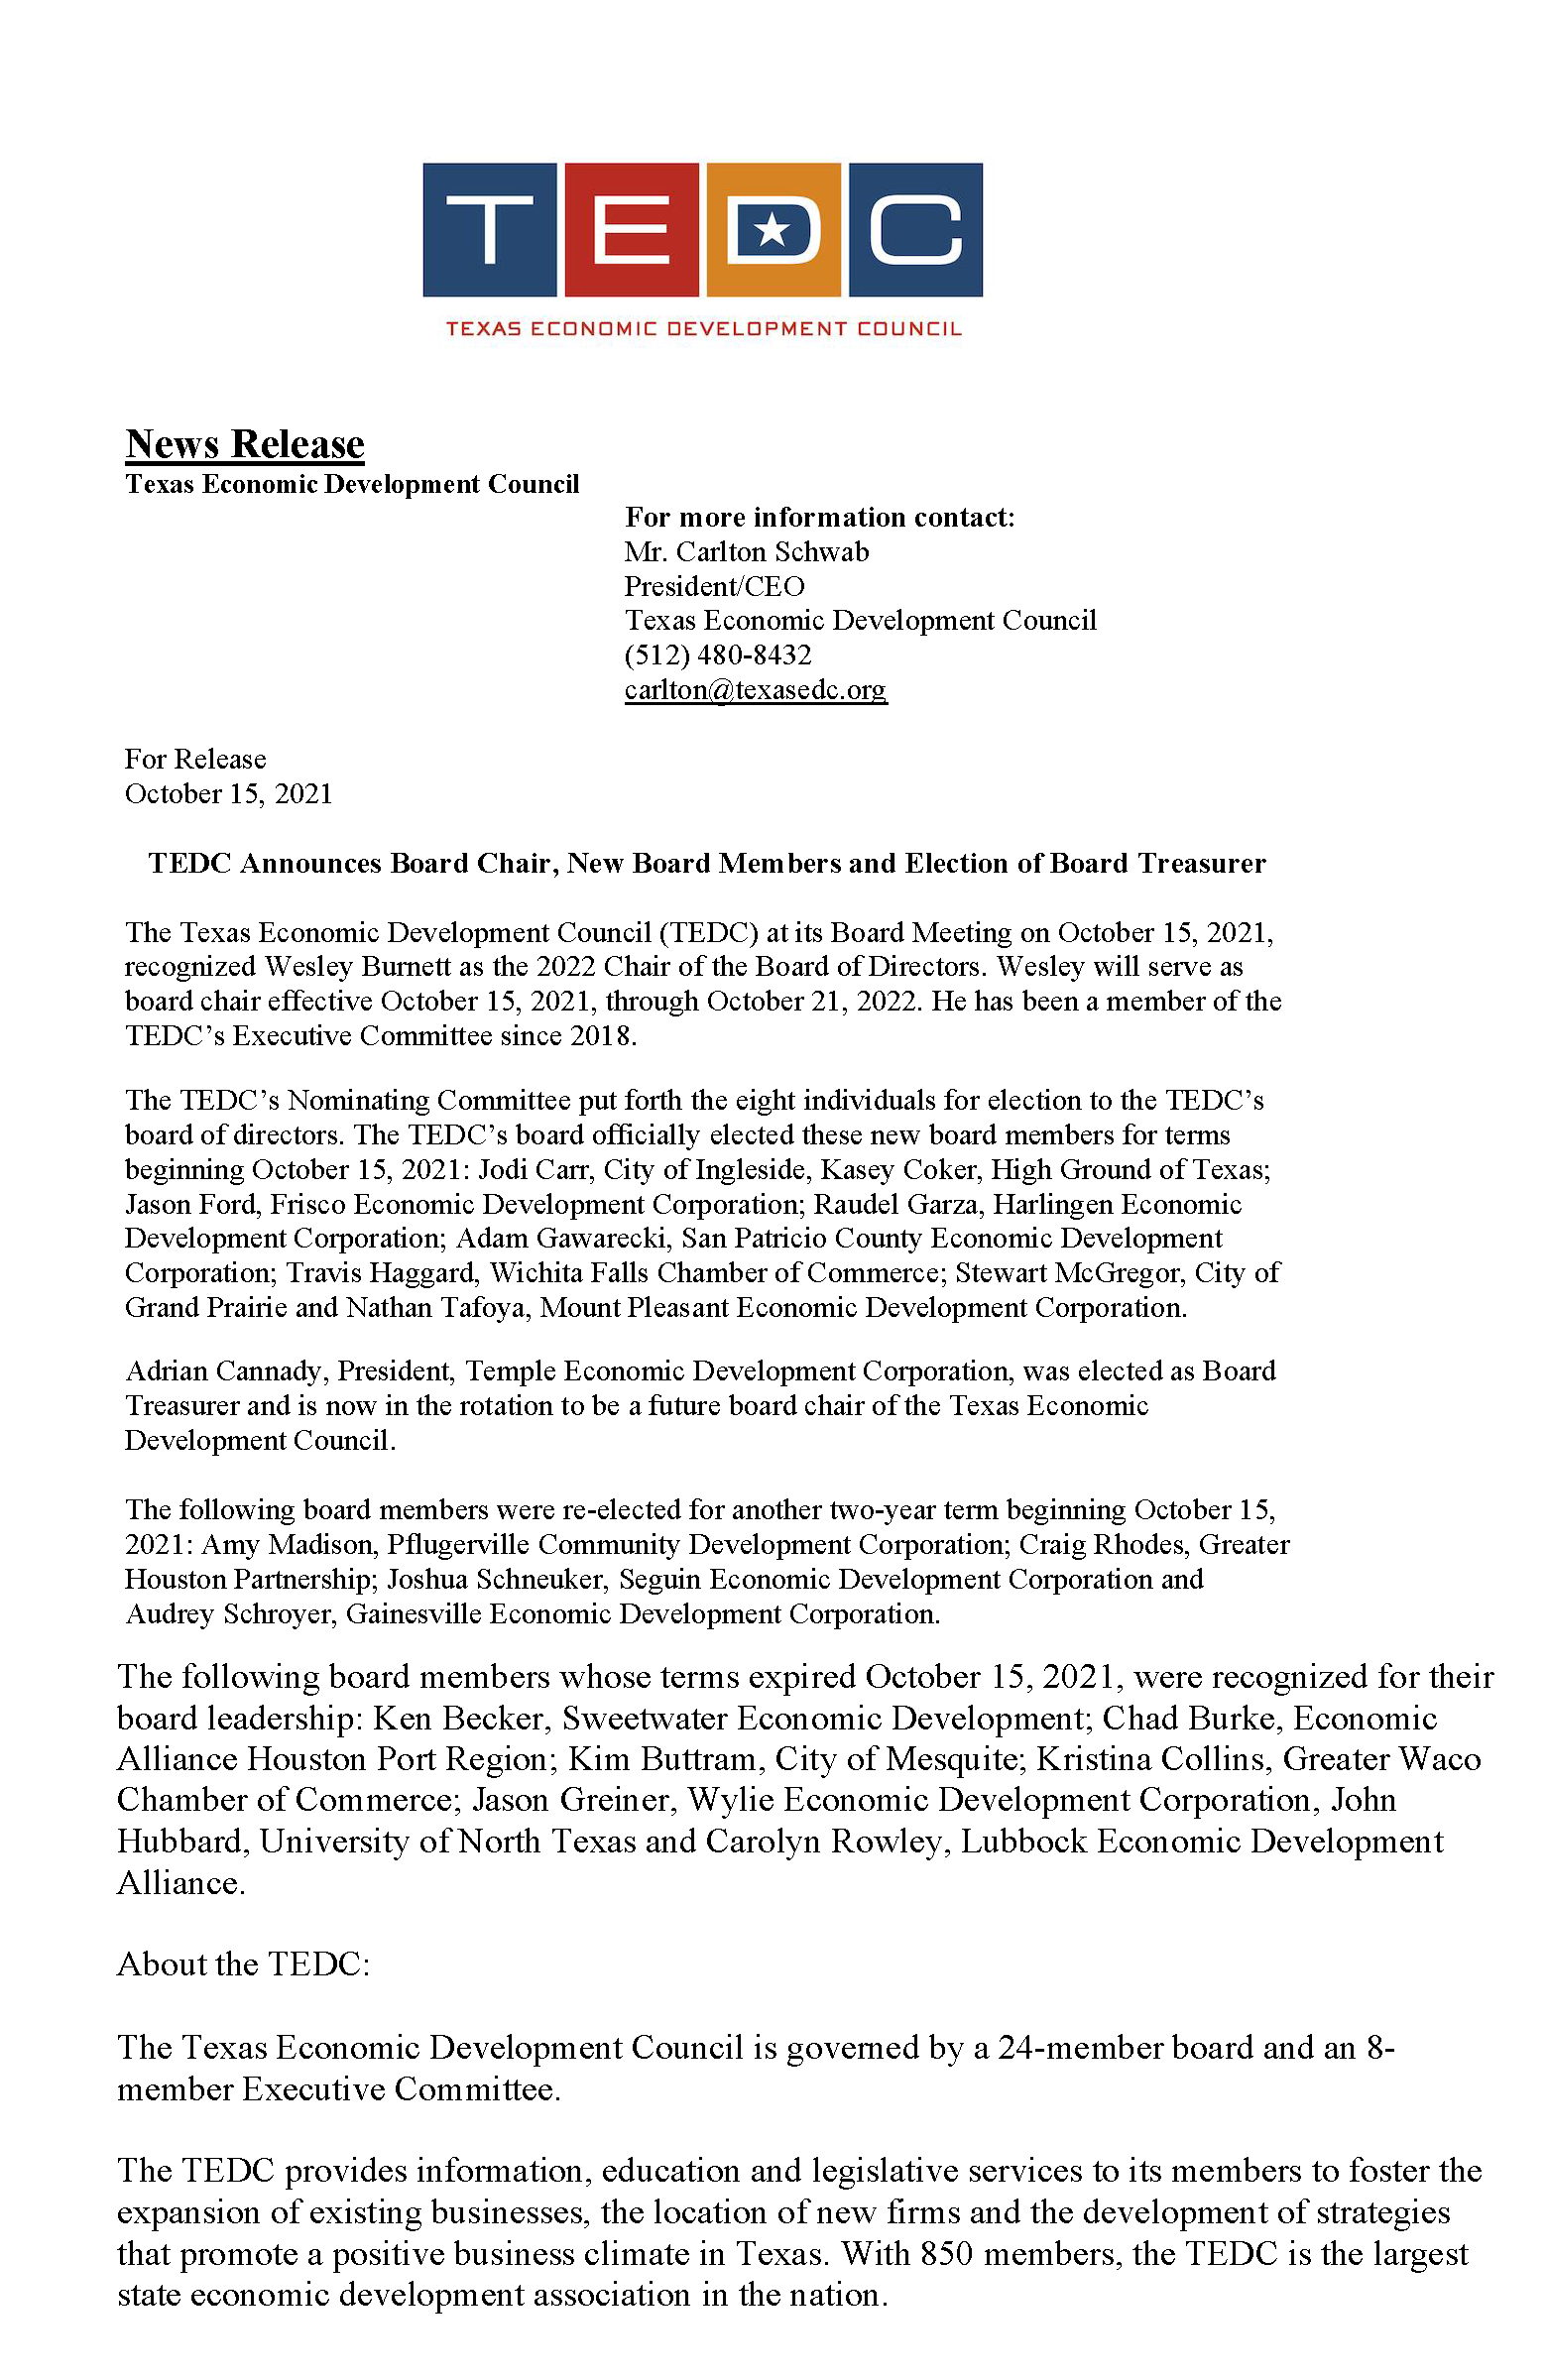 TEDC-Board-2021-Press-Release-(1)-new.png